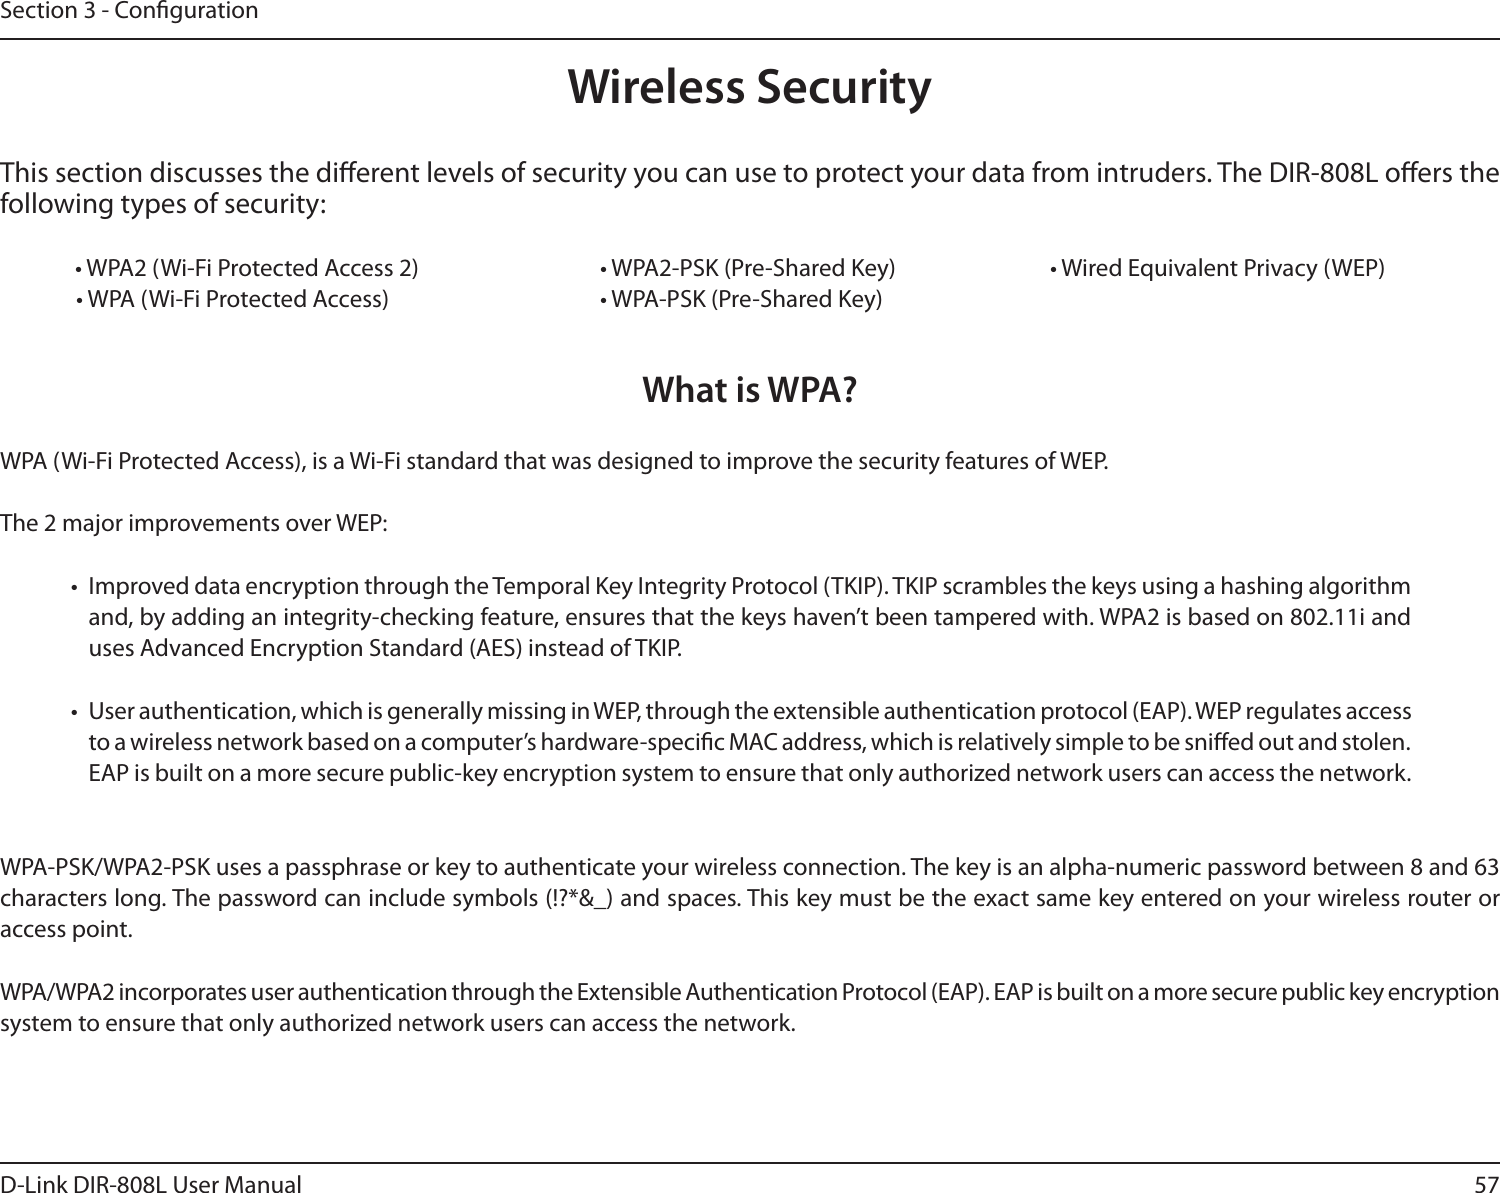 57D-Link DIR-808L User ManualSection 3 - CongurationWireless SecurityThis section discusses the dierent levels of security you can use to protect your data from intruders. The DIR-808L oers the following types of security:  • WPA2 (Wi-Fi Protected Access 2)       • WPA2-PSK (Pre-Shared Key)     • Wired Equivalent Privacy (WEP) • WPA (Wi-Fi Protected Access)      • WPA-PSK (Pre-Shared Key)What is WPA?WPA (Wi-Fi Protected Access), is a Wi-Fi standard that was designed to improve the security features of WEP.  The 2 major improvements over WEP: •  Improved data encryption through the Temporal Key Integrity Protocol (TKIP). TKIP scrambles the keys using a hashing algorithm and, by adding an integrity-checking feature, ensures that the keys haven’t been tampered with. WPA2 is based on 802.11i and uses Advanced Encryption Standard (AES) instead of TKIP.•  User authentication, which is generally missing in WEP, through the extensible authentication protocol (EAP). WEP regulates access to a wireless network based on a computer’s hardware-specic MAC address, which is relatively simple to be snied out and stolen. EAP is built on a more secure public-key encryption system to ensure that only authorized network users can access the network.WPA-PSK/WPA2-PSK uses a passphrase or key to authenticate your wireless connection. The key is an alpha-numeric password between 8 and 63 characters long. The password can include symbols (!?*&amp;_) and spaces. This key must be the exact same key entered on your wireless router or access point.WPA/WPA2 incorporates user authentication through the Extensible Authentication Protocol (EAP). EAP is built on a more secure public key encryption system to ensure that only authorized network users can access the network.